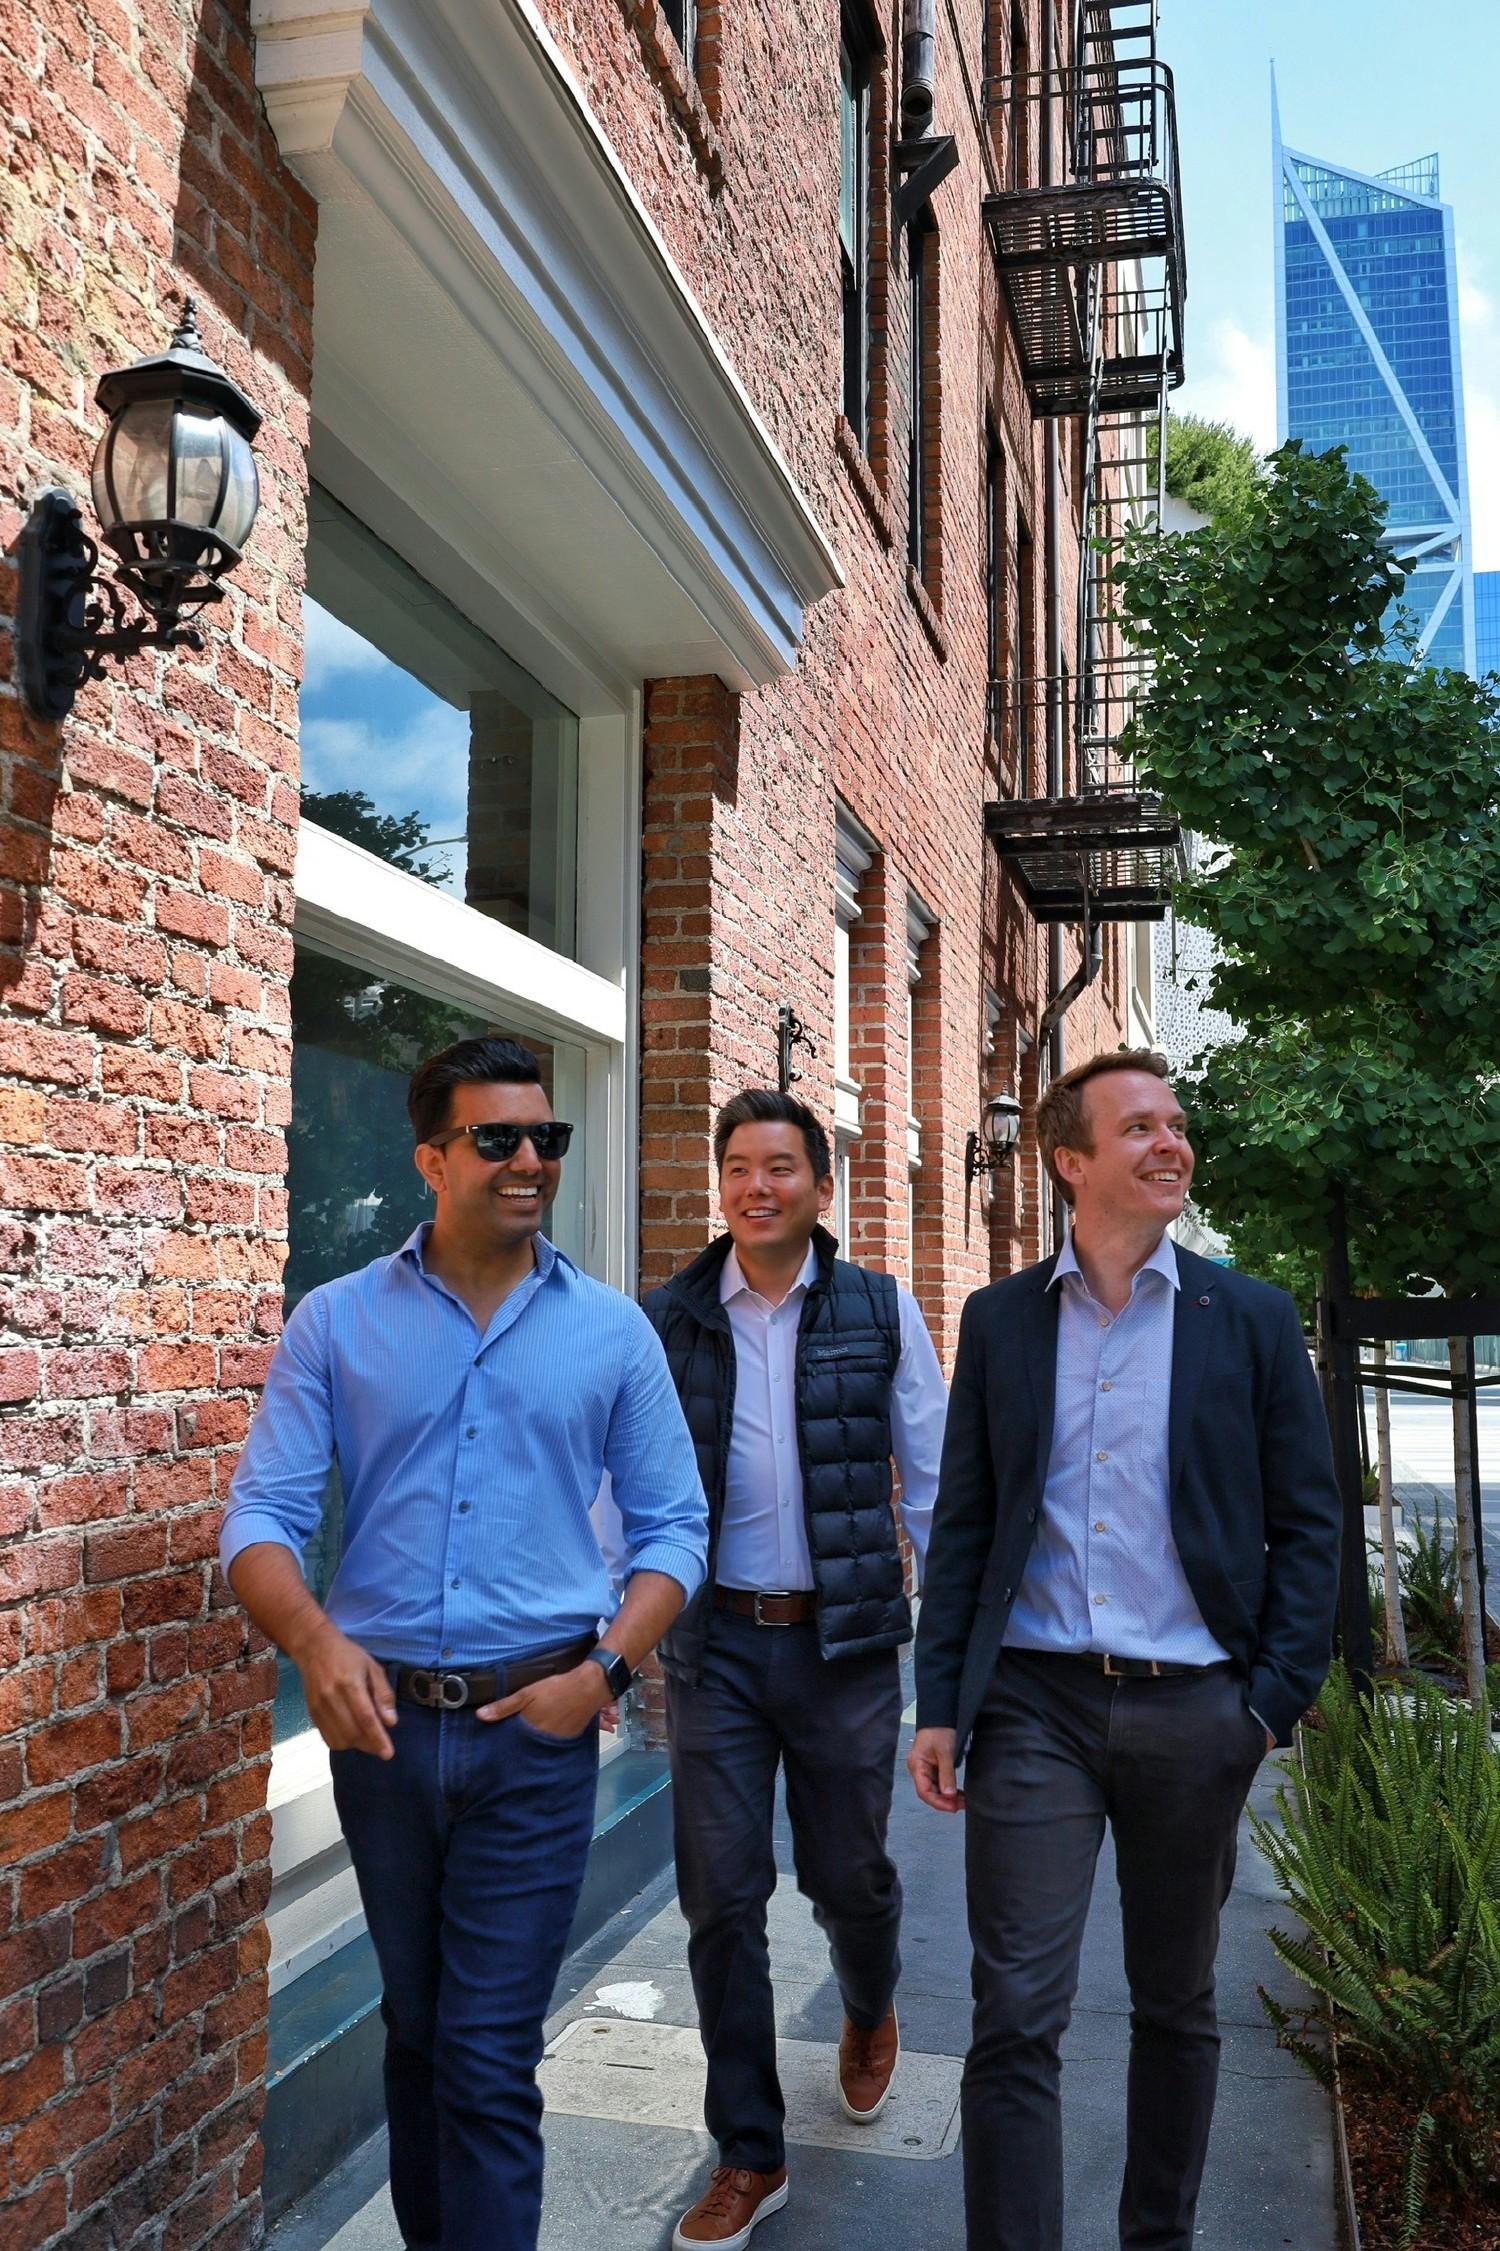 3 of the 4 co-founders taking a stroll in SF